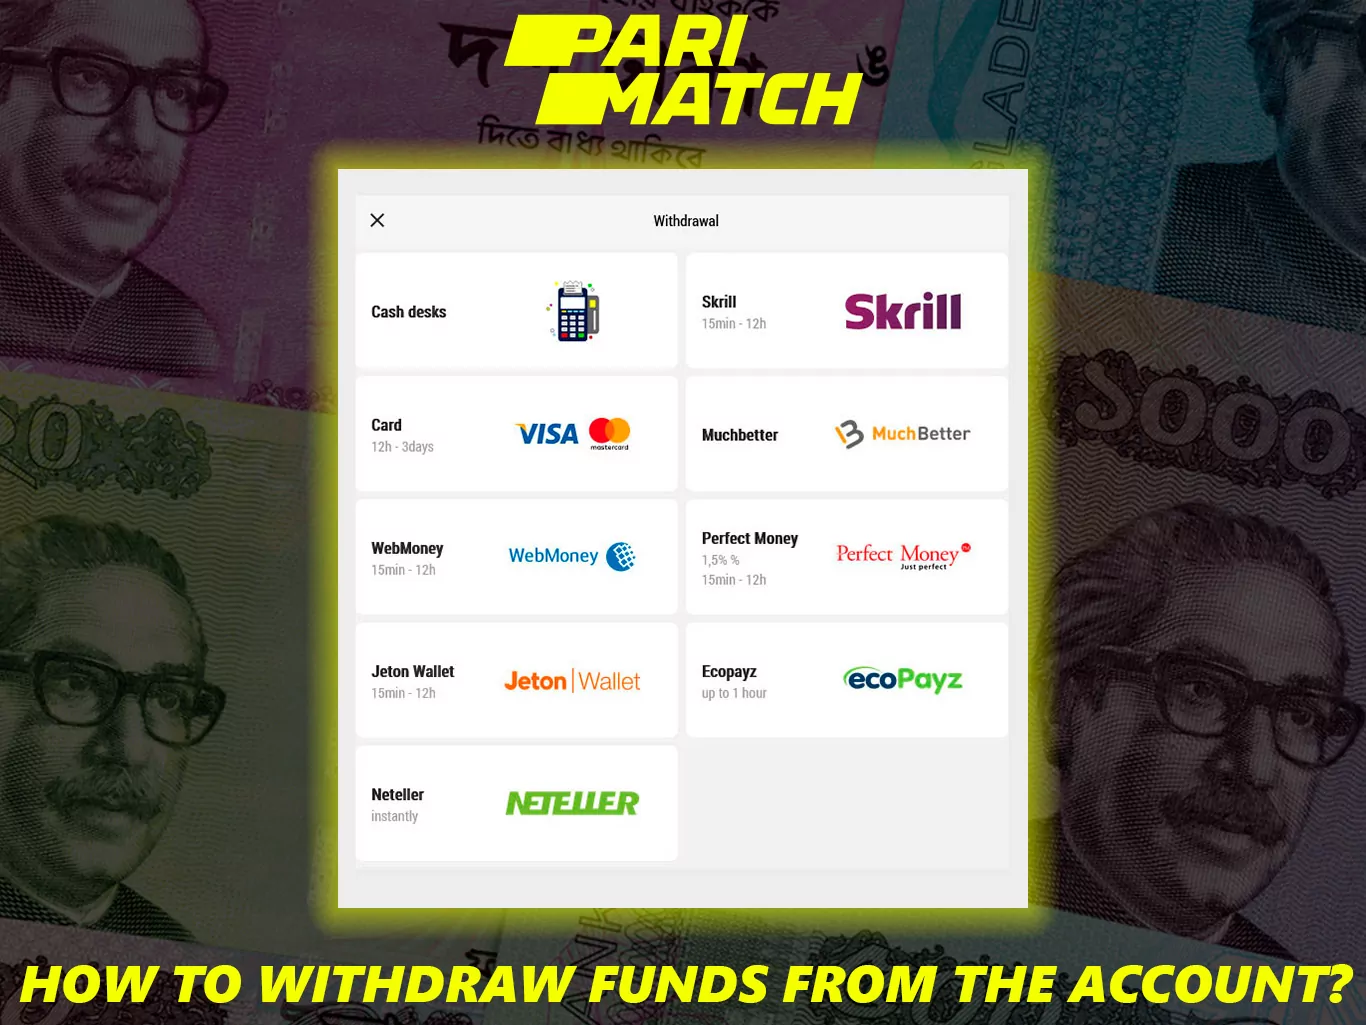 Important information about withdrawing funds from Parimatch.